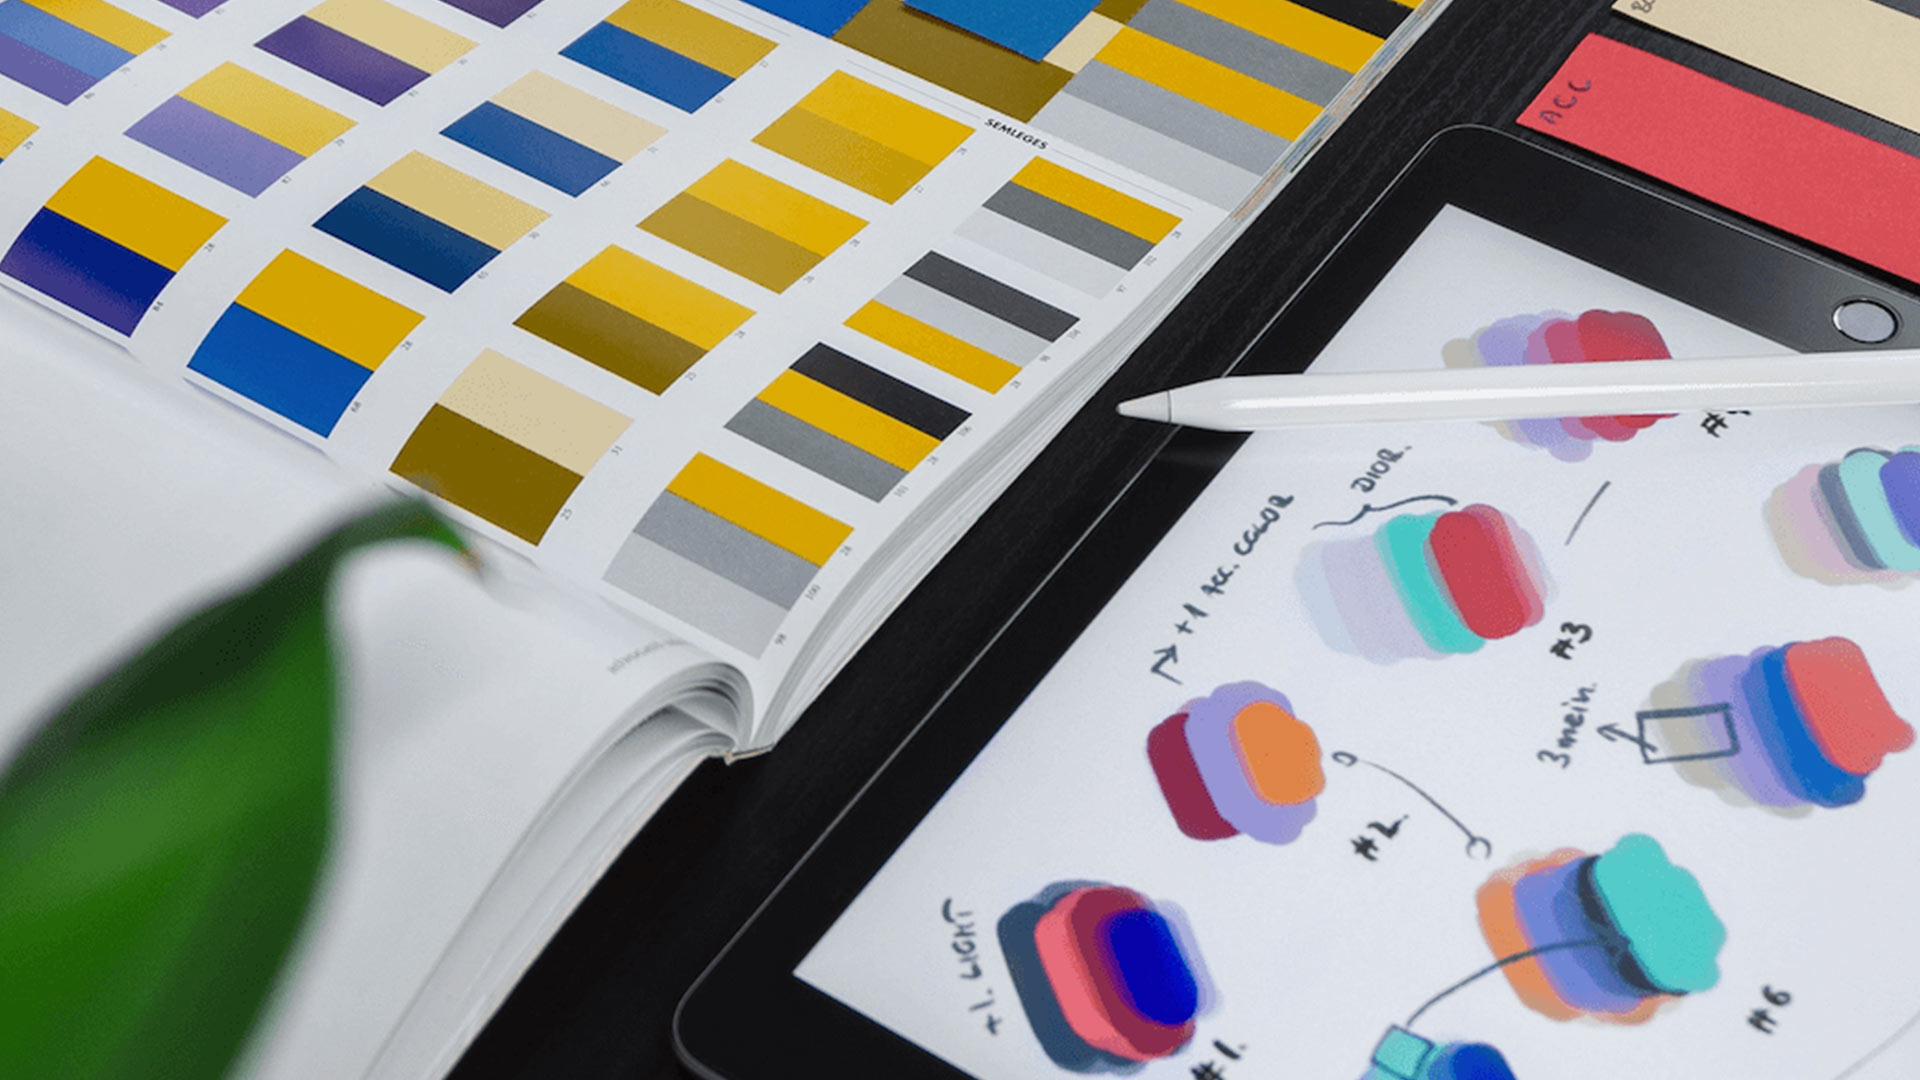 iPad and books with color swatches